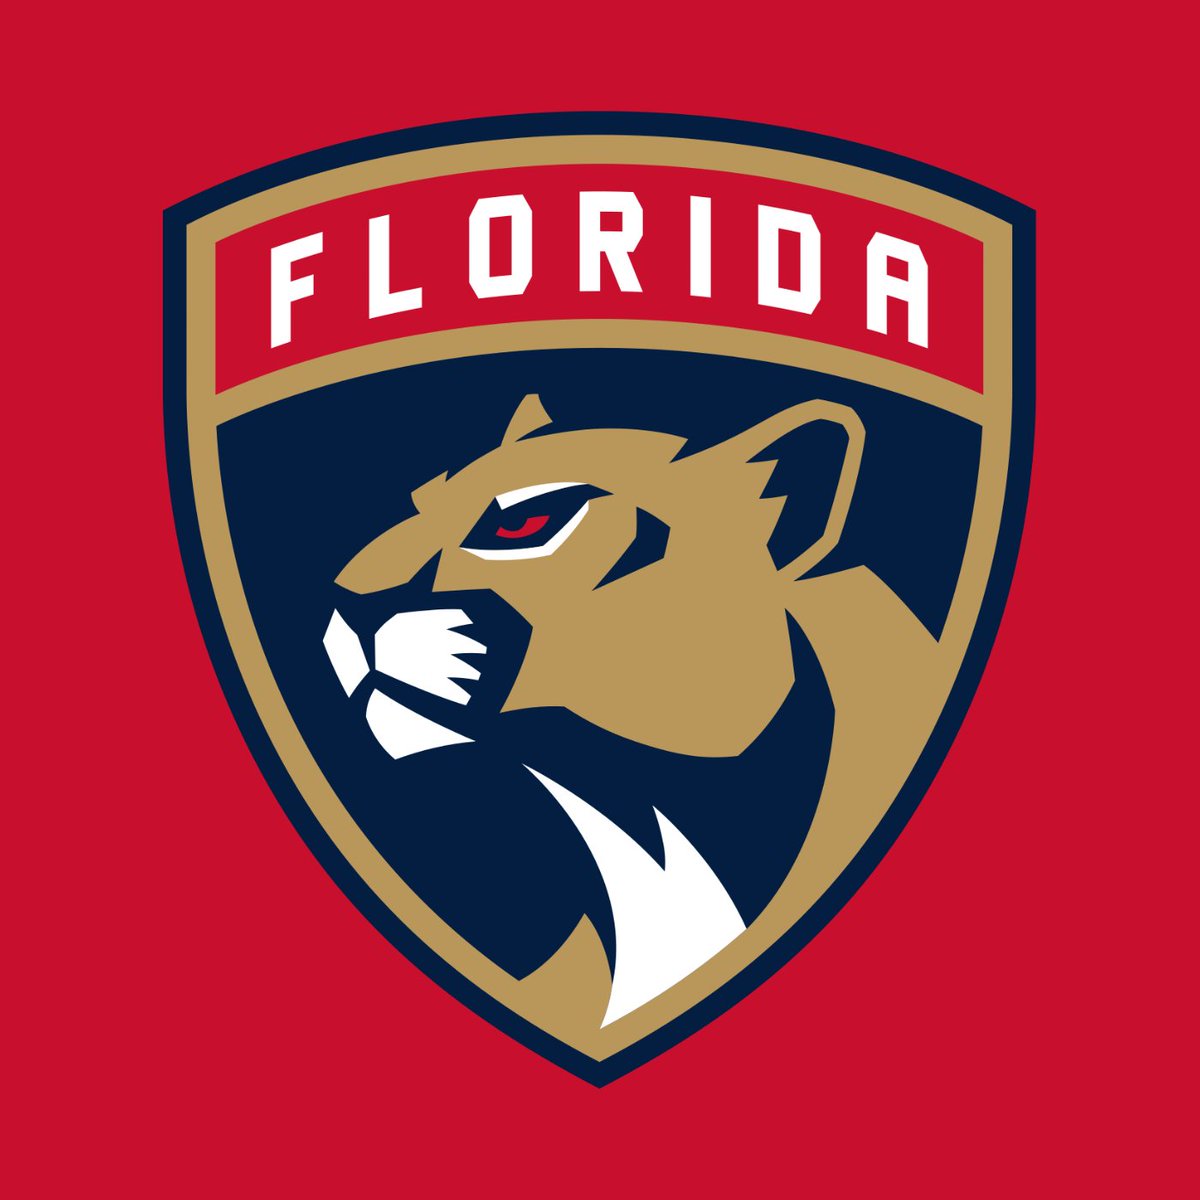 With the 92nd overall selection in the NHL Draft, the Florida Panthers are proud to select: Mario. https://t.co/NAoU0QeXYj